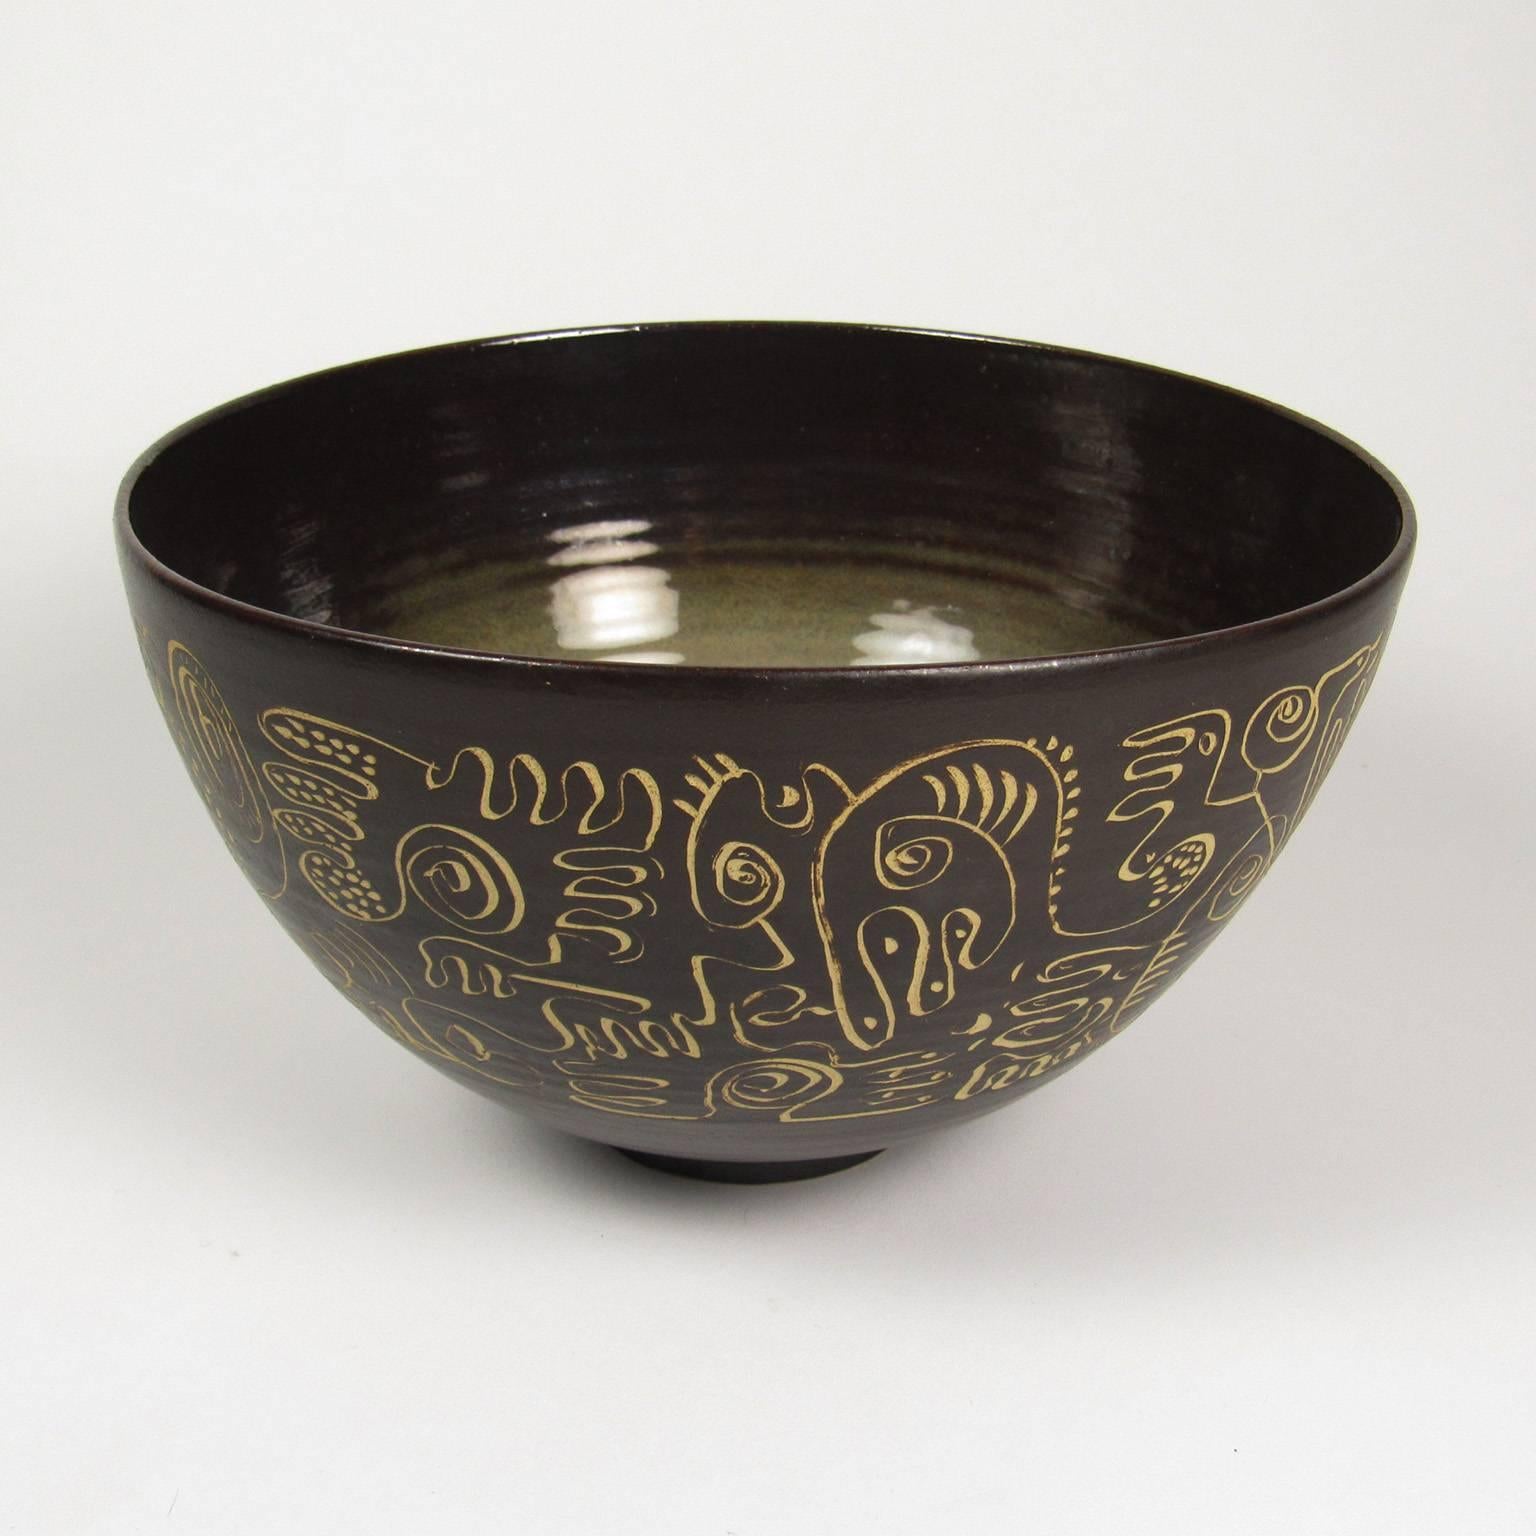 Edwin Scheier brown glazed ceramic bowl, mid-20th century. Brown glaze conical bowl with Sgraffito design. Signed on foot Scheier. Measure: Height 5 1/2 in., diameter 8 3/4 in.
 